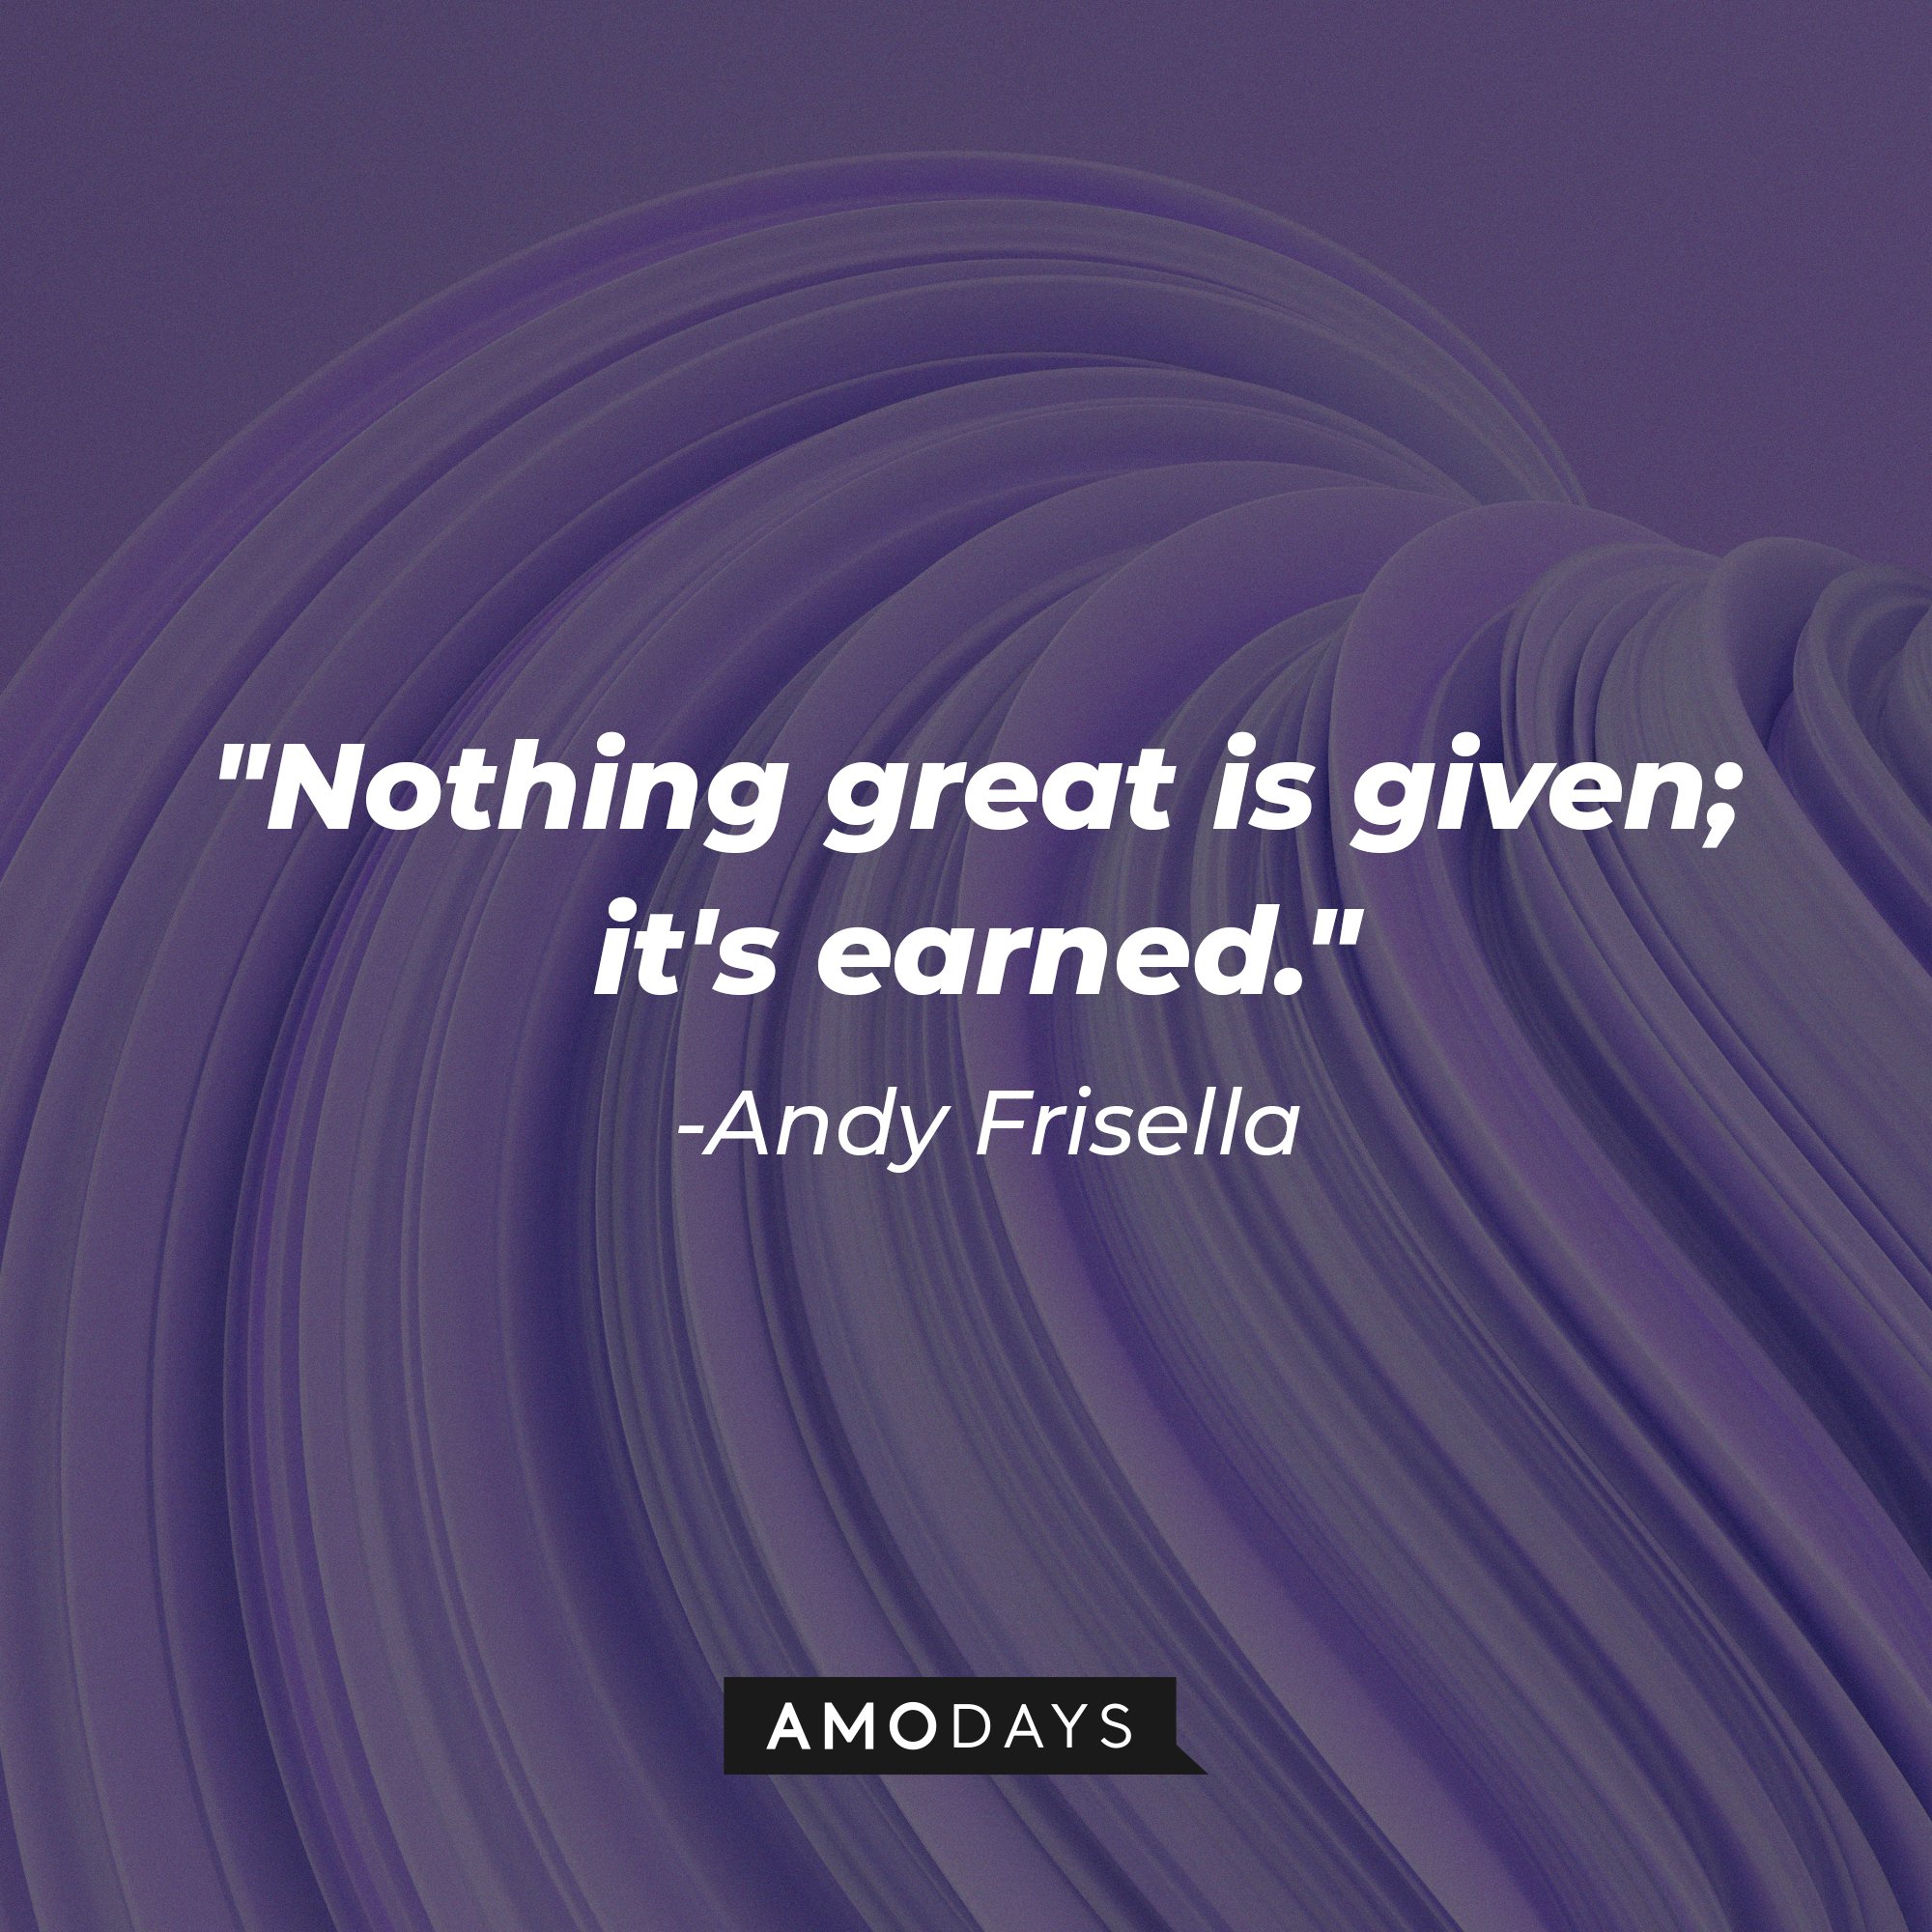 Andy Frisella's quote: "Nothing great is given; it's earned." | Image: AmoDays